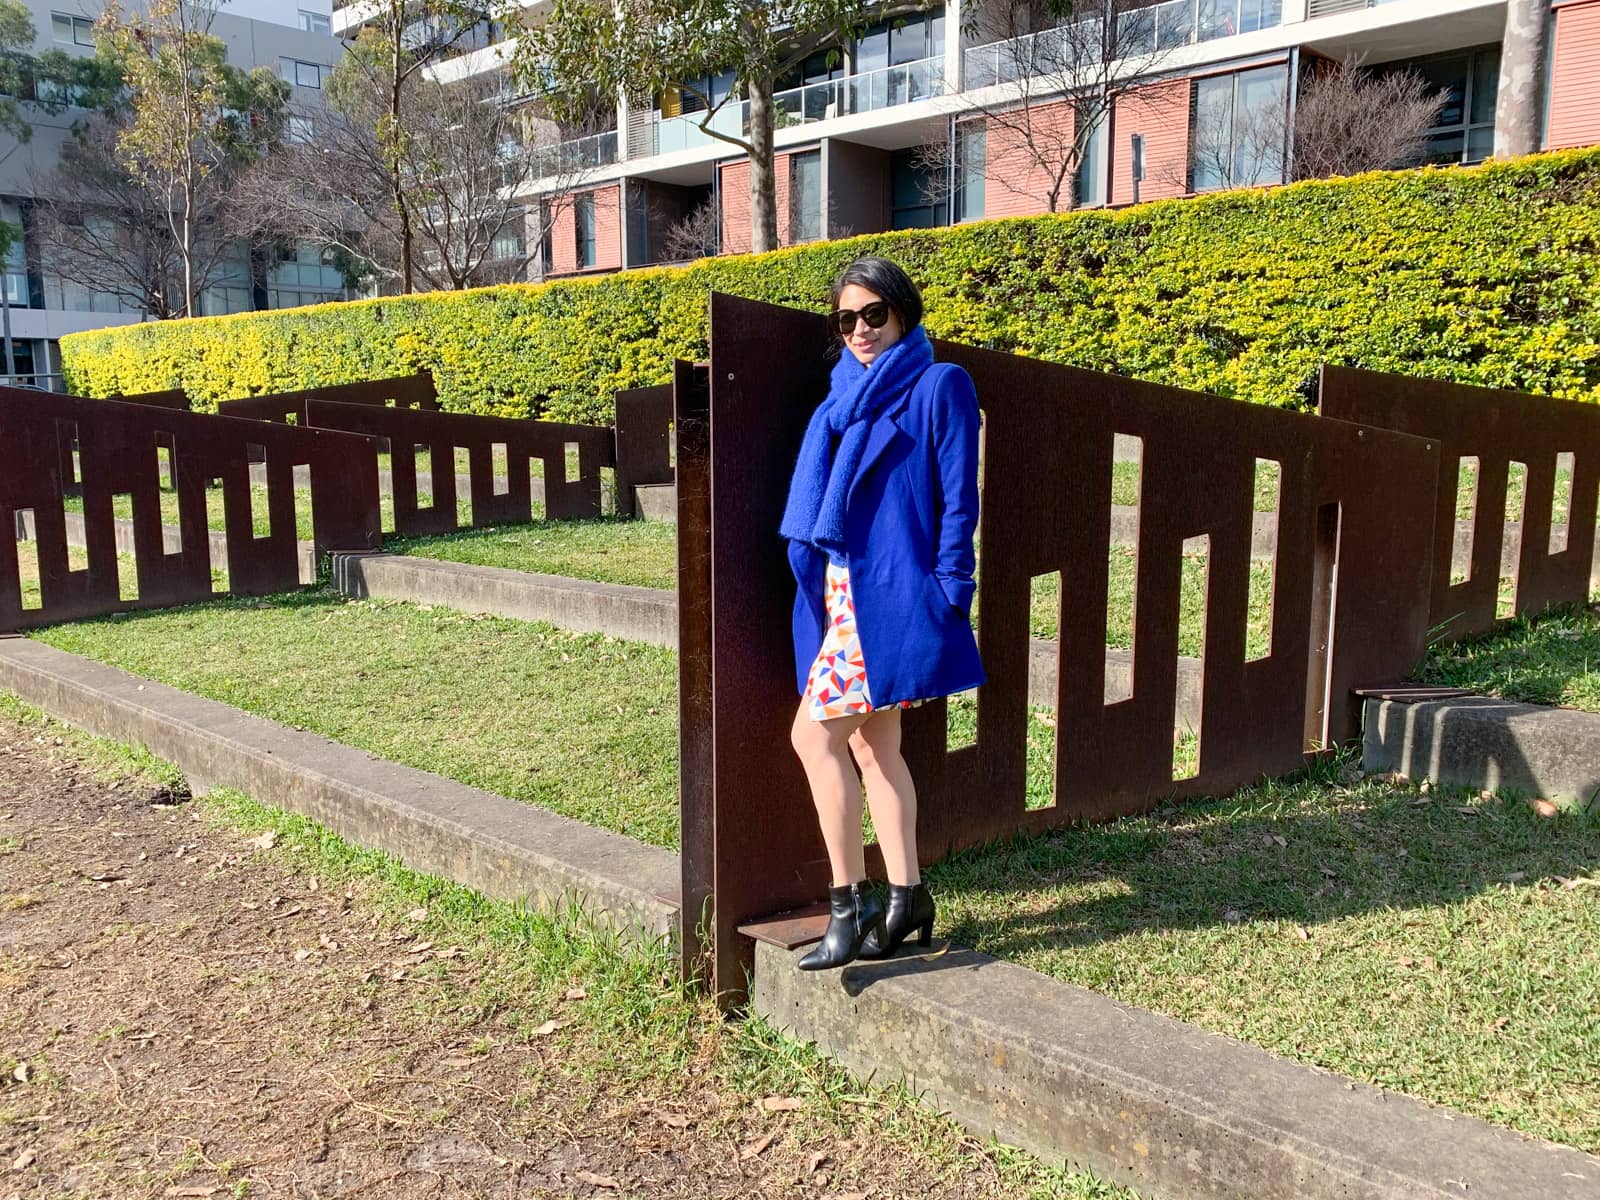 A woman in a bright blue coat and bright blue scarf standing next to a small section of fence in a park. She has sunglasses on and her hands in her coat pockets. She is wearing a colourful short skirt and black boots.